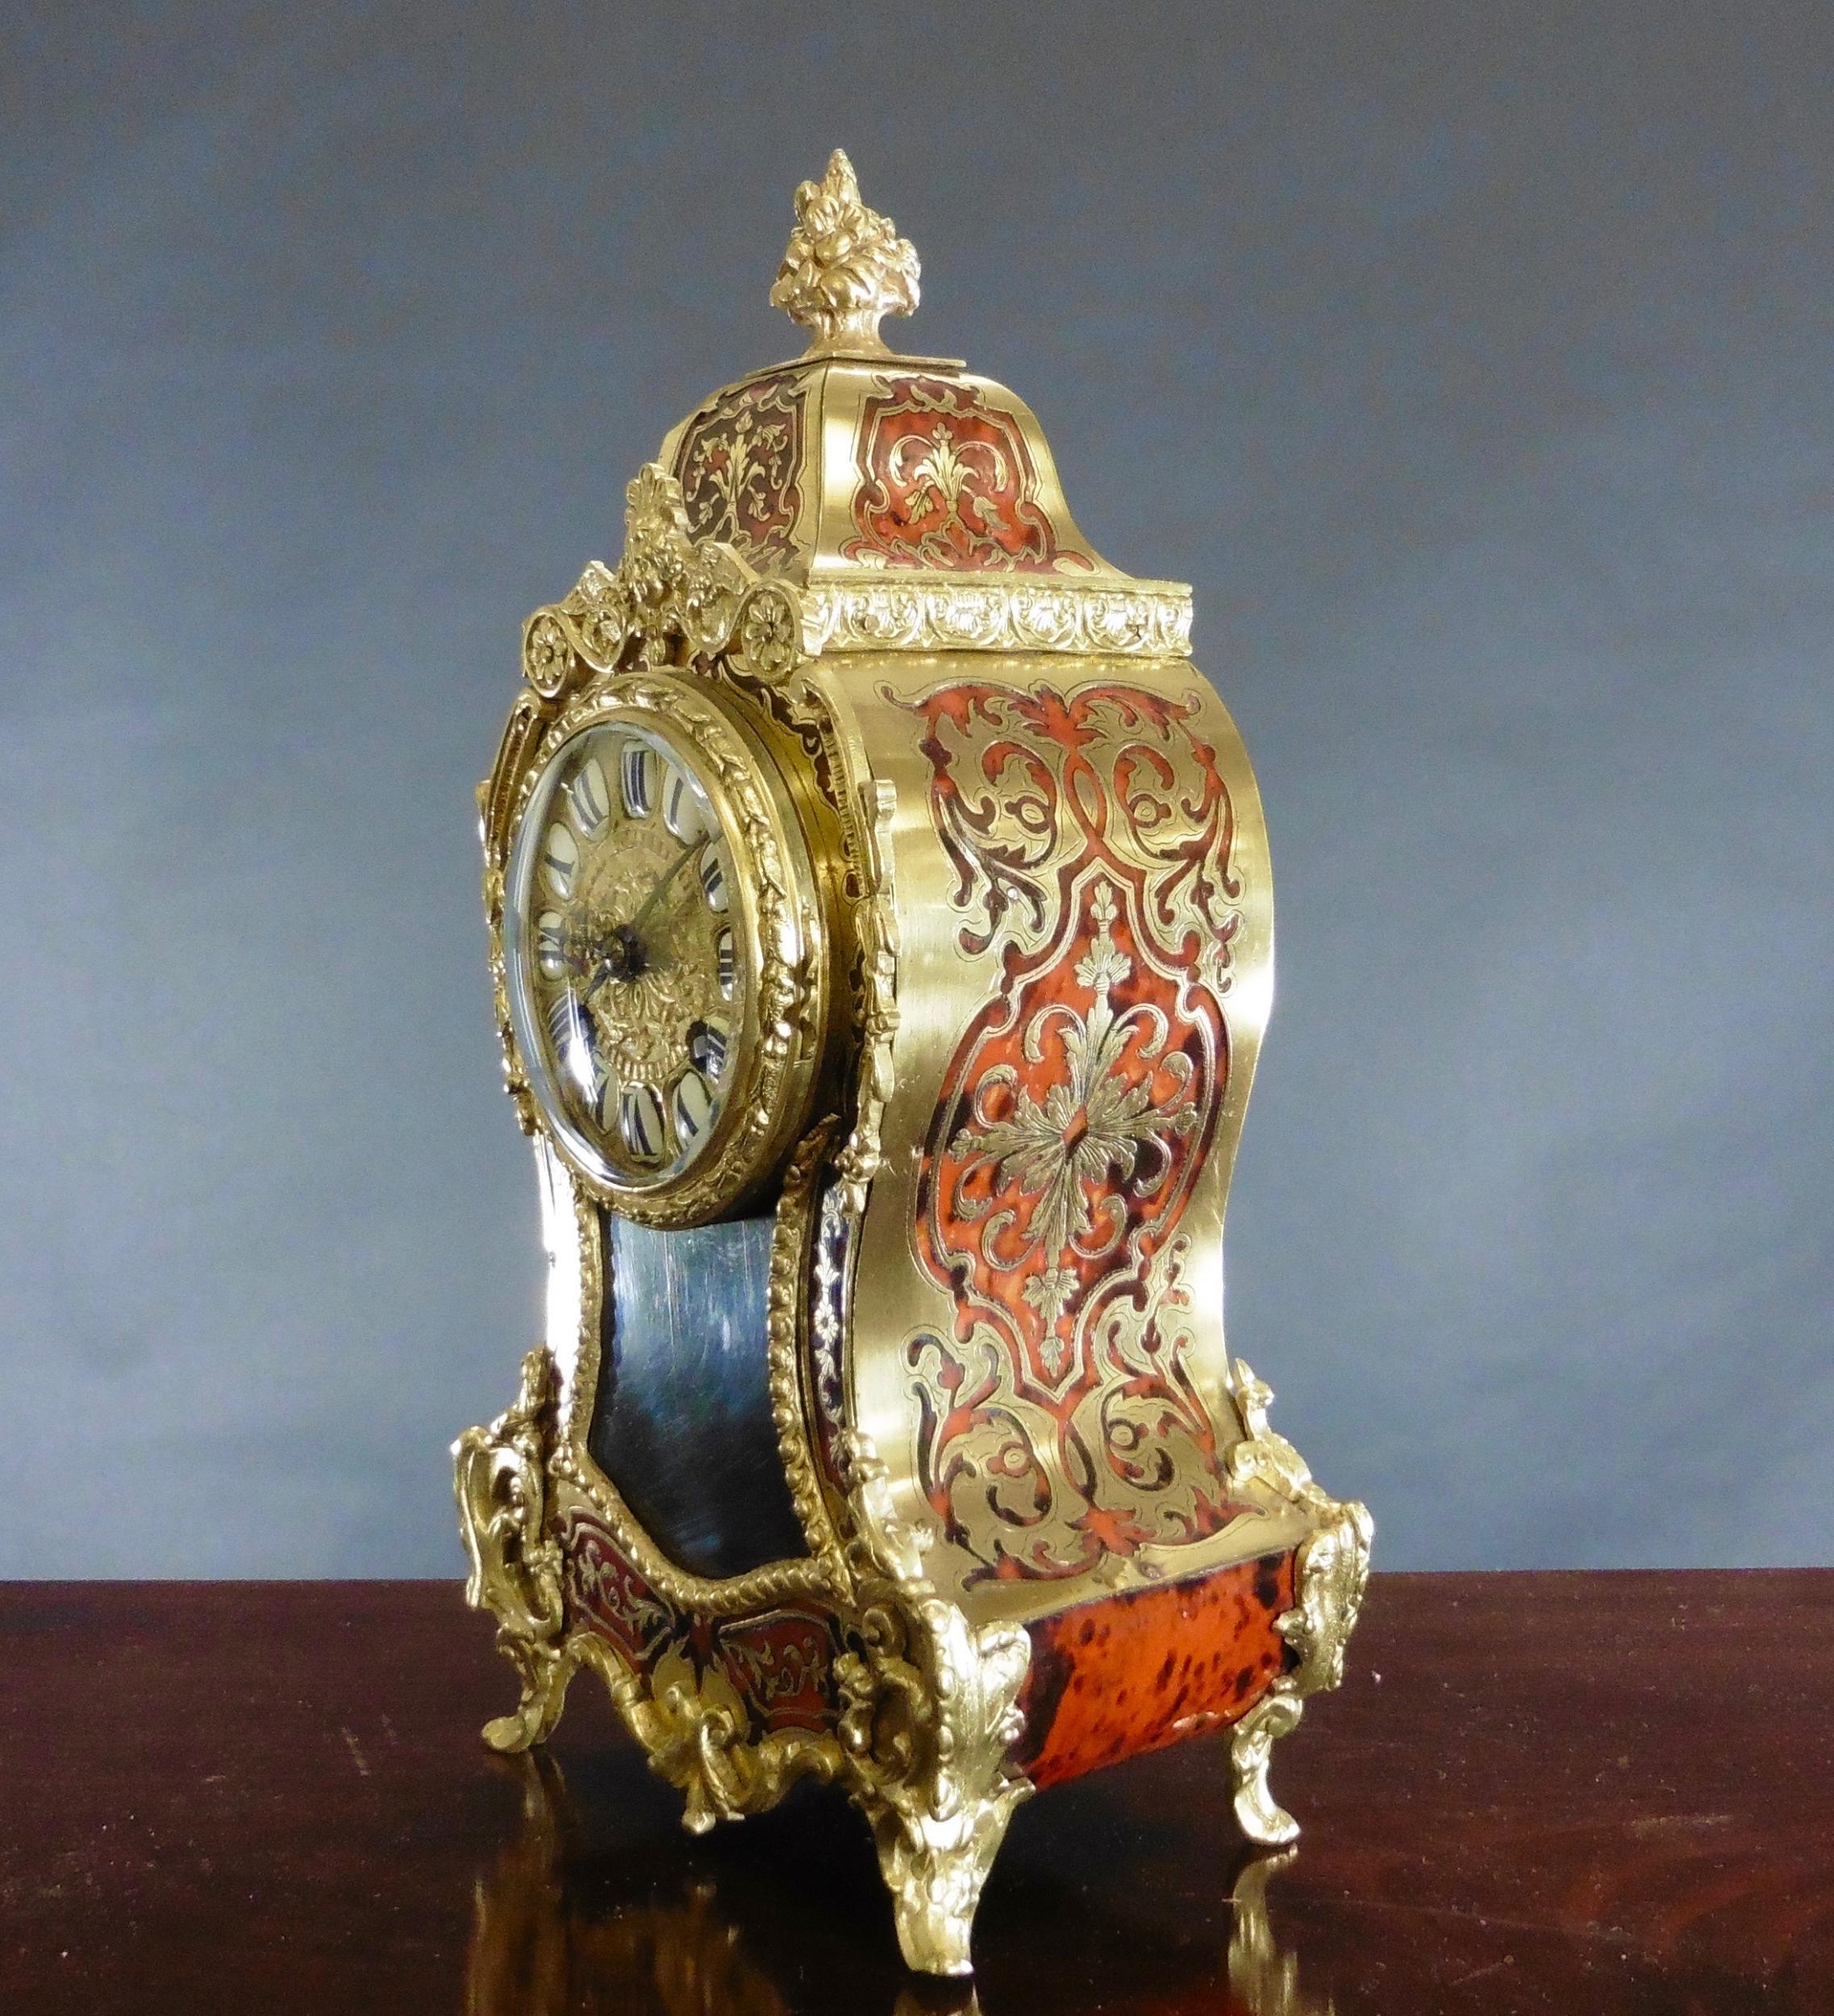 French Tortoiseshell Boulle clock with ormolu mounts surmounted by an ornate central finial.

Gilded dial with segmented blue enamel Roman numerals.

Eight day movement striking the hours and halves on a coiled gong signed ‘A.D.Mougin, Paris’,